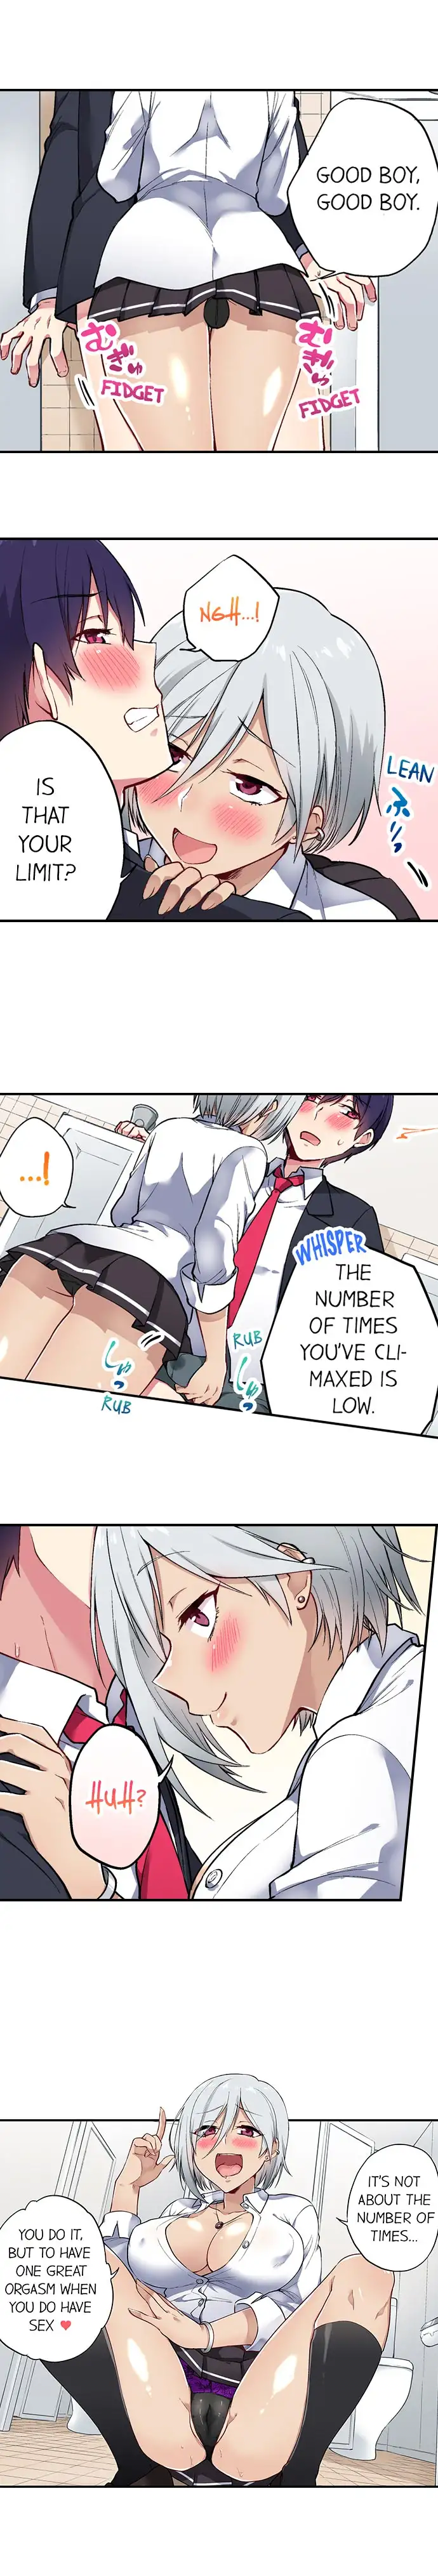 Committee Chairman, Didn’t You Just Masturbate In the Bathroom? I Can See the Number of Times People Orgasm - Chapter 43 Page 8